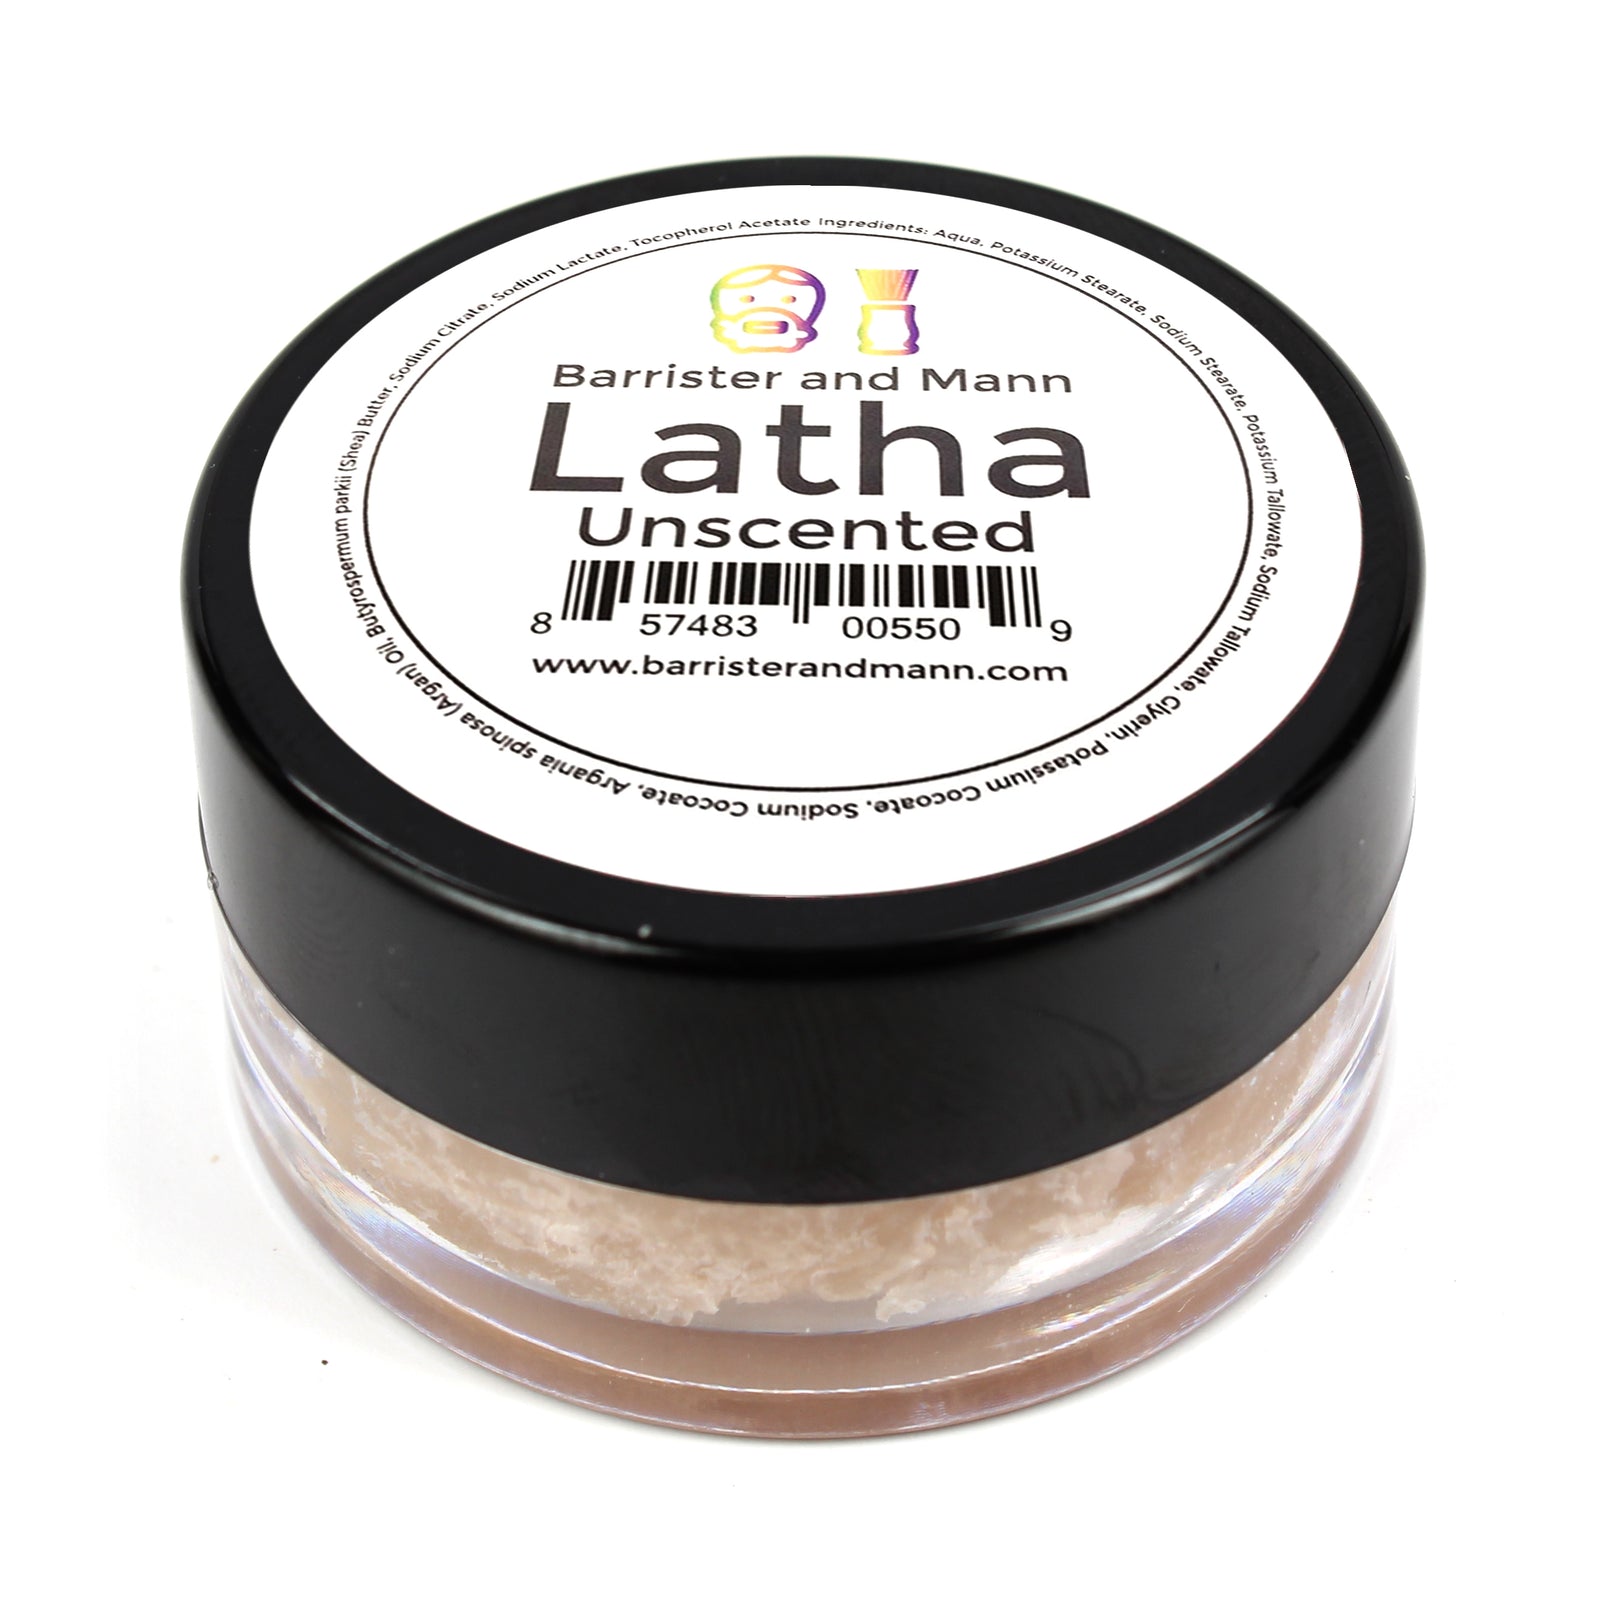 Barrister and Mann - Latha Unscented Shaving Soap Sample